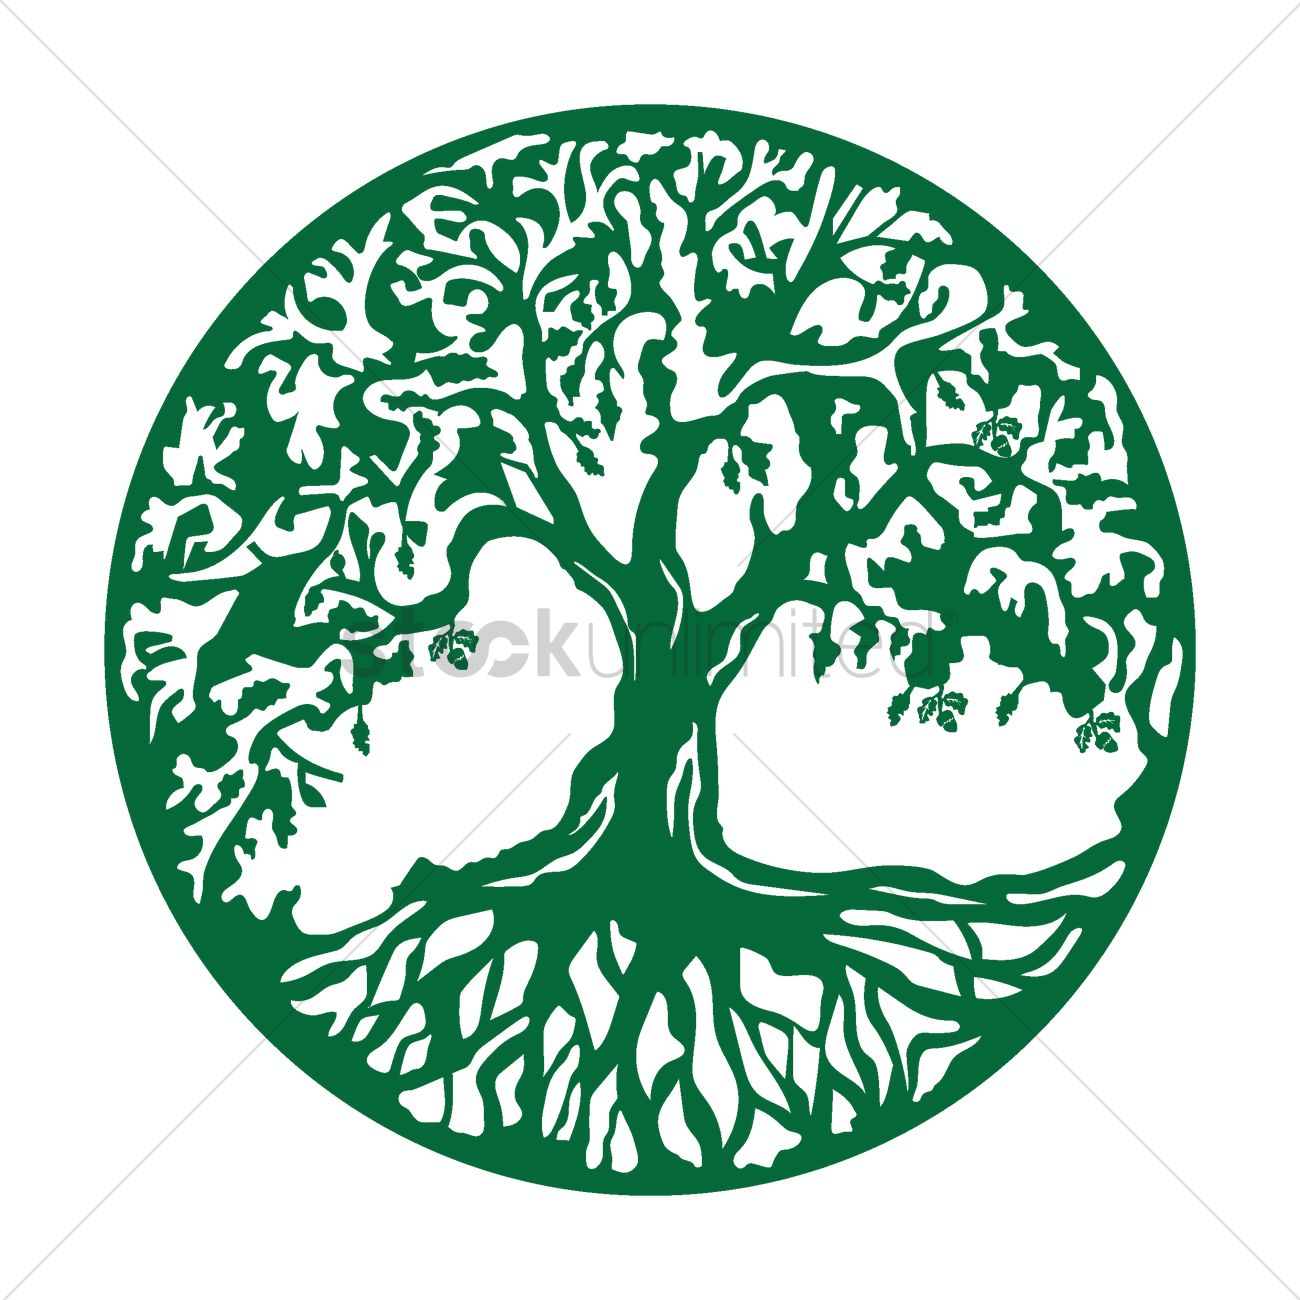 Plant roots, root, roots, science, sprout, tree roots icon | Icon 